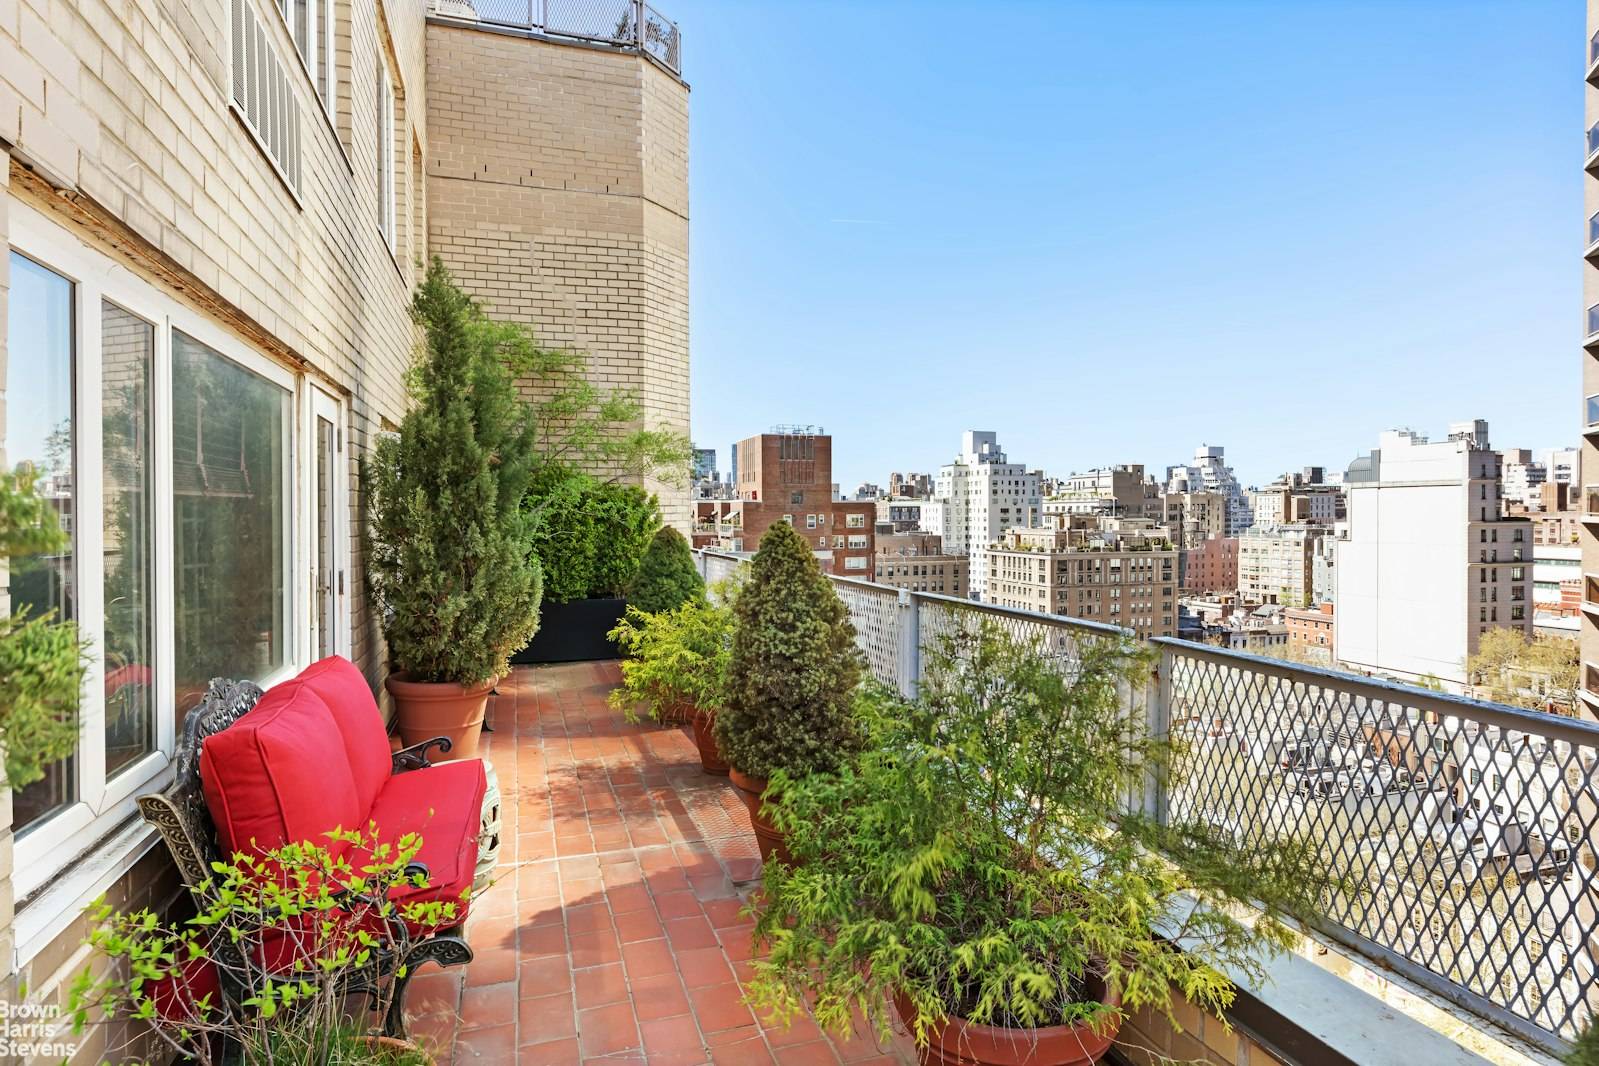 FAB NEW 2 BD CONDO WITH 500 SQ Ft WRAP TERRACEWelcome Home to this Oversized 2 Bedroom, 2 Bathroom Apartment with Wrap Around Terrace and incredible city views at the ...